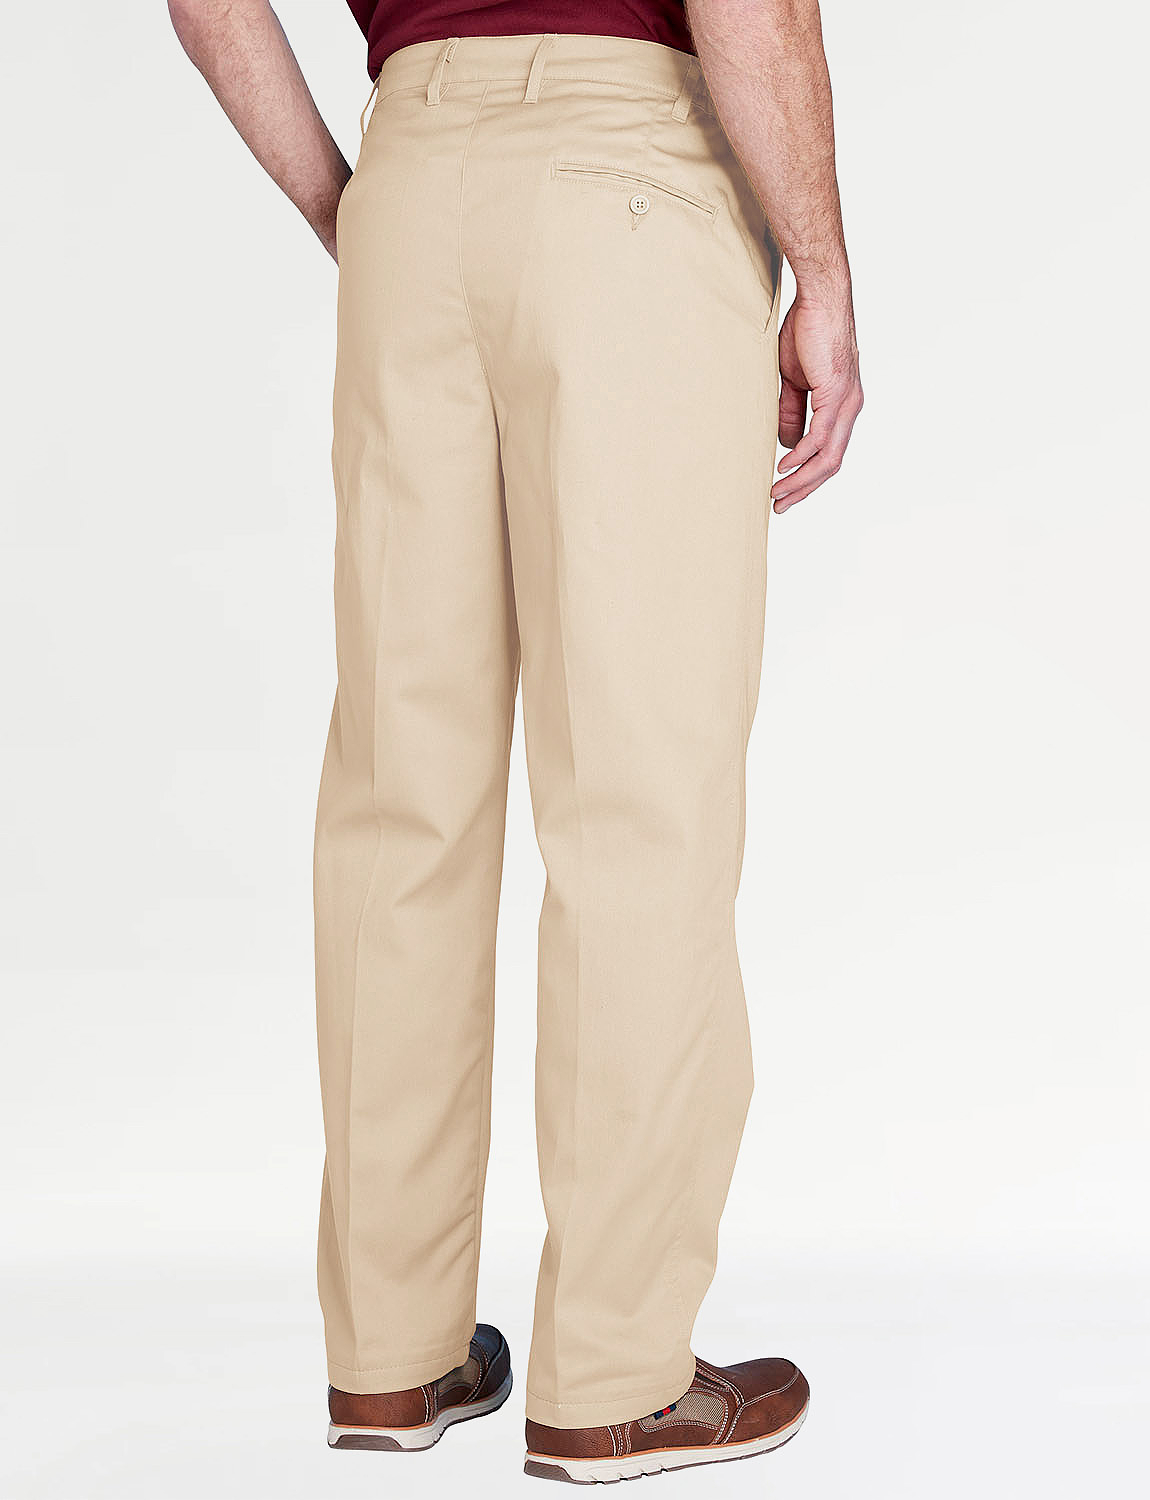 Stain and Water Resistant Cotton Trouser | Chums